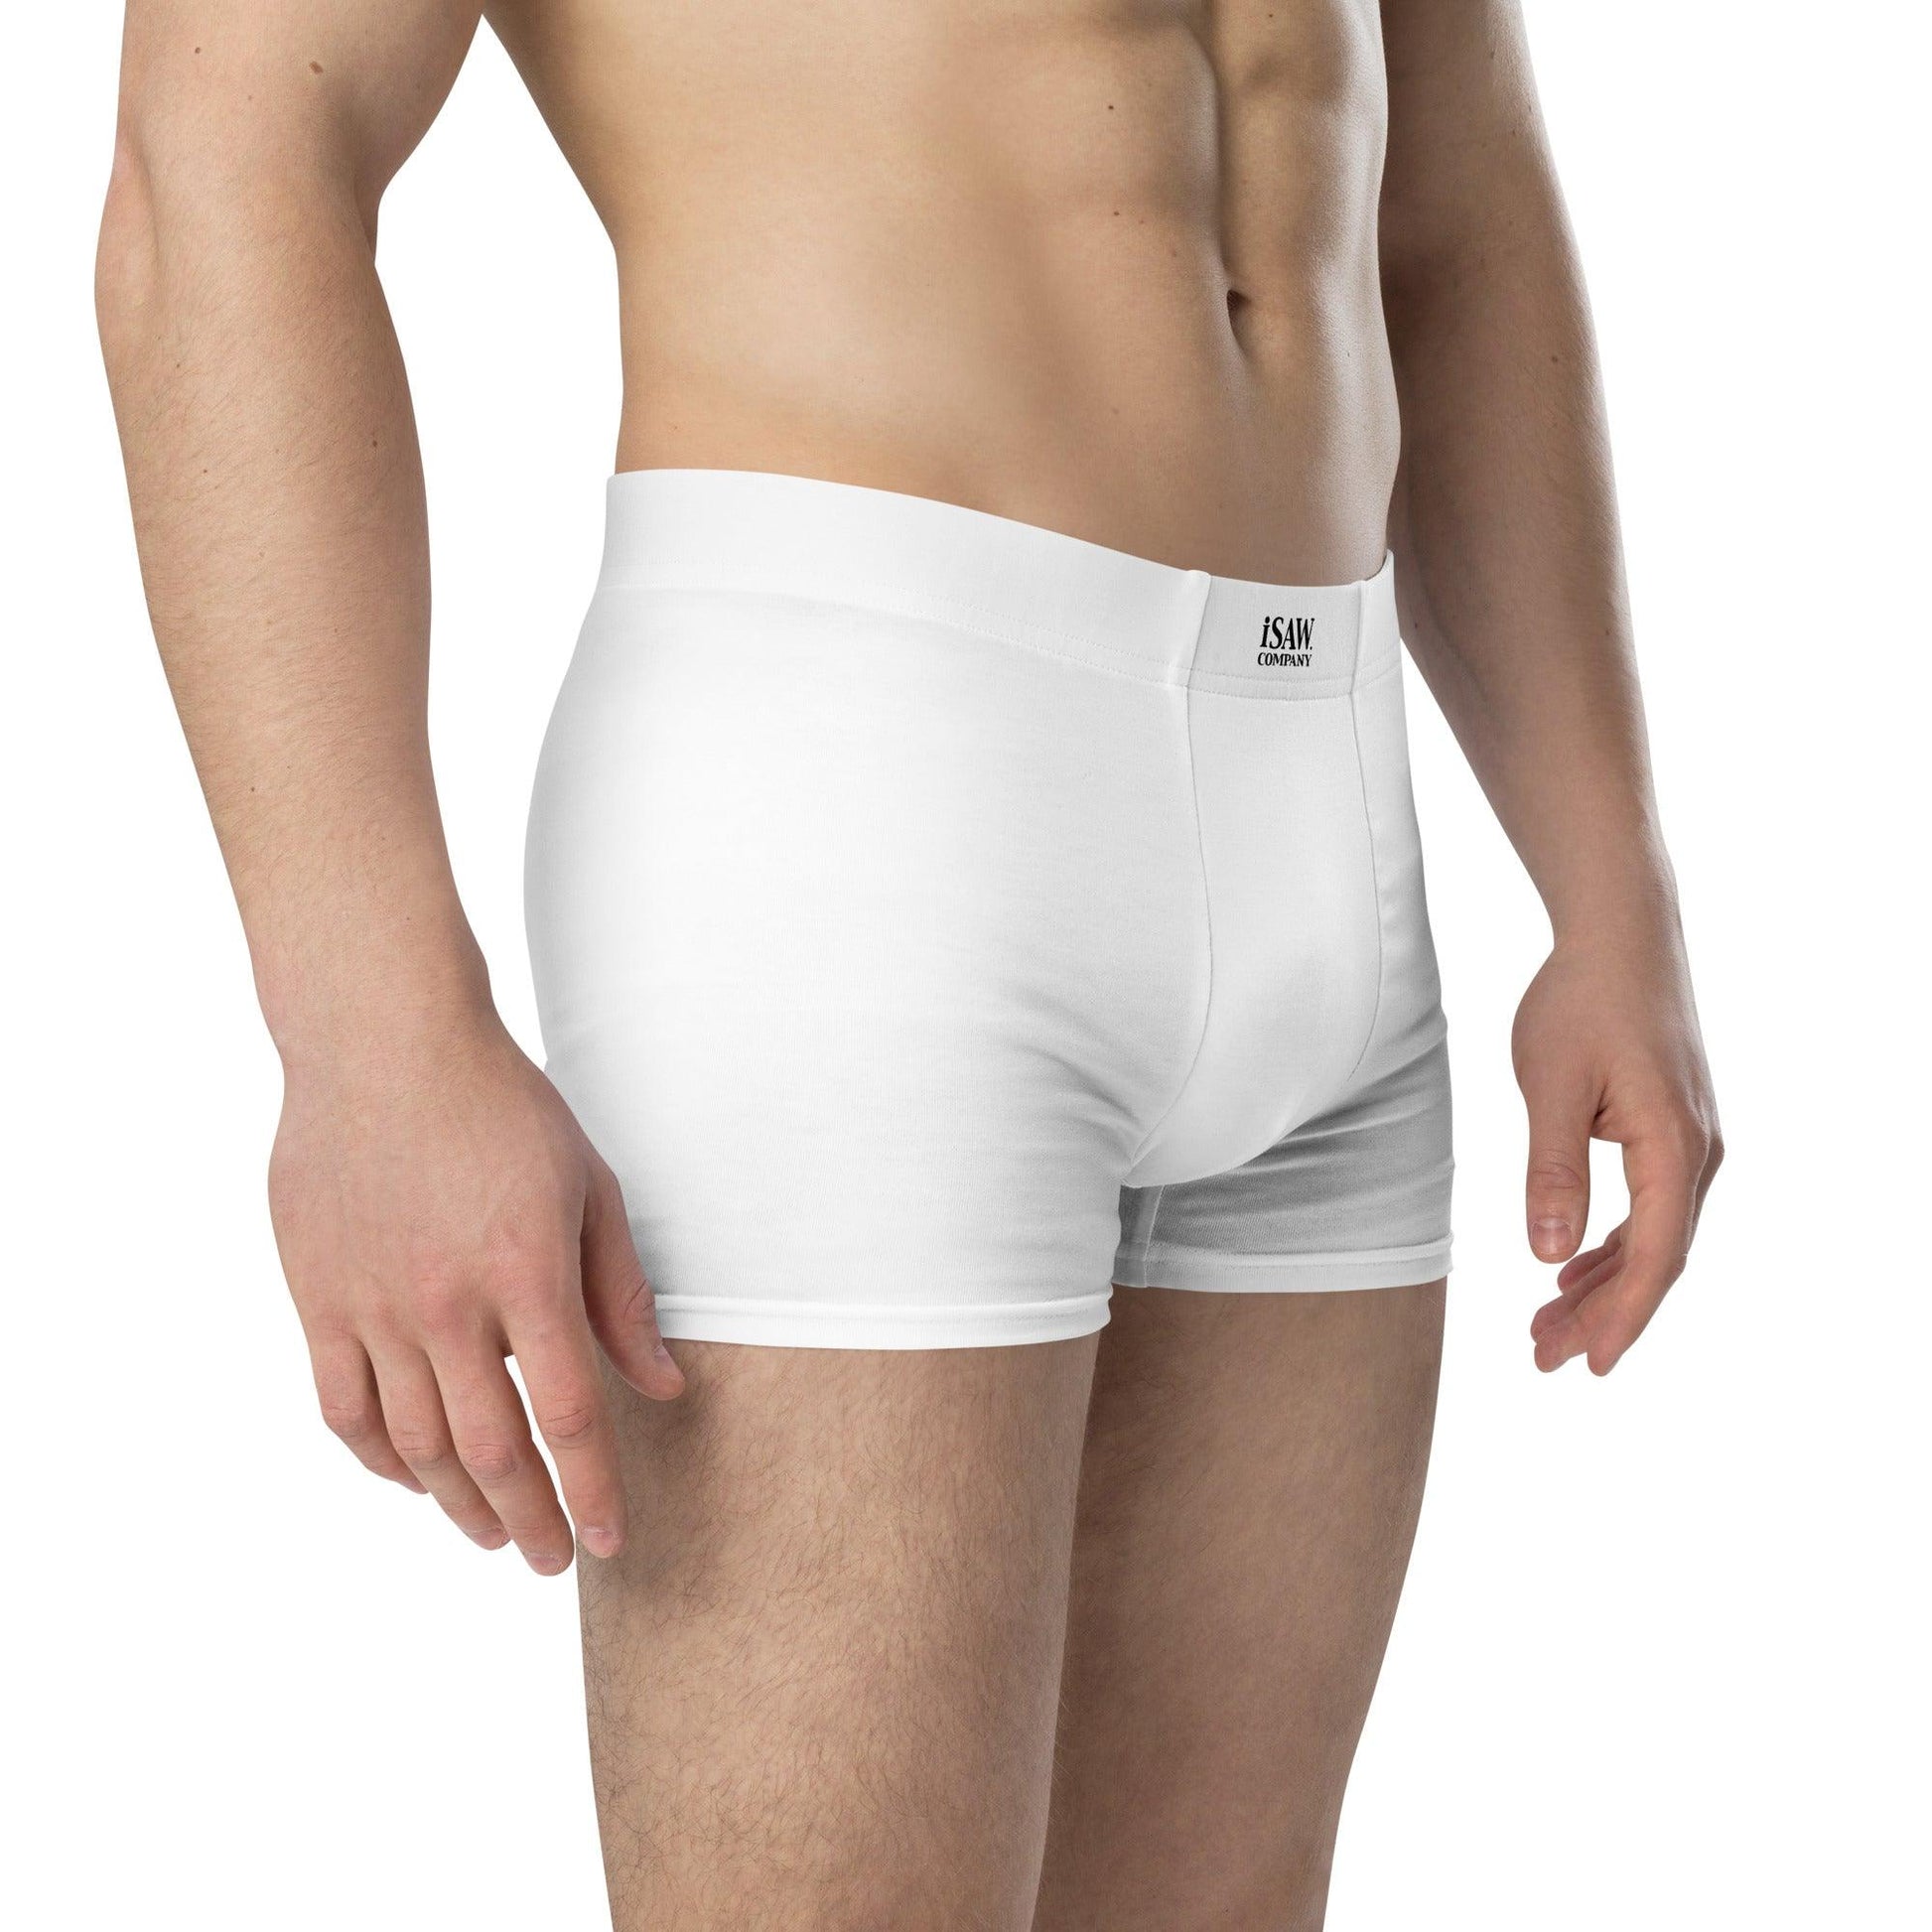 iSAW Mens White Boxer Briefs - iSAW Company